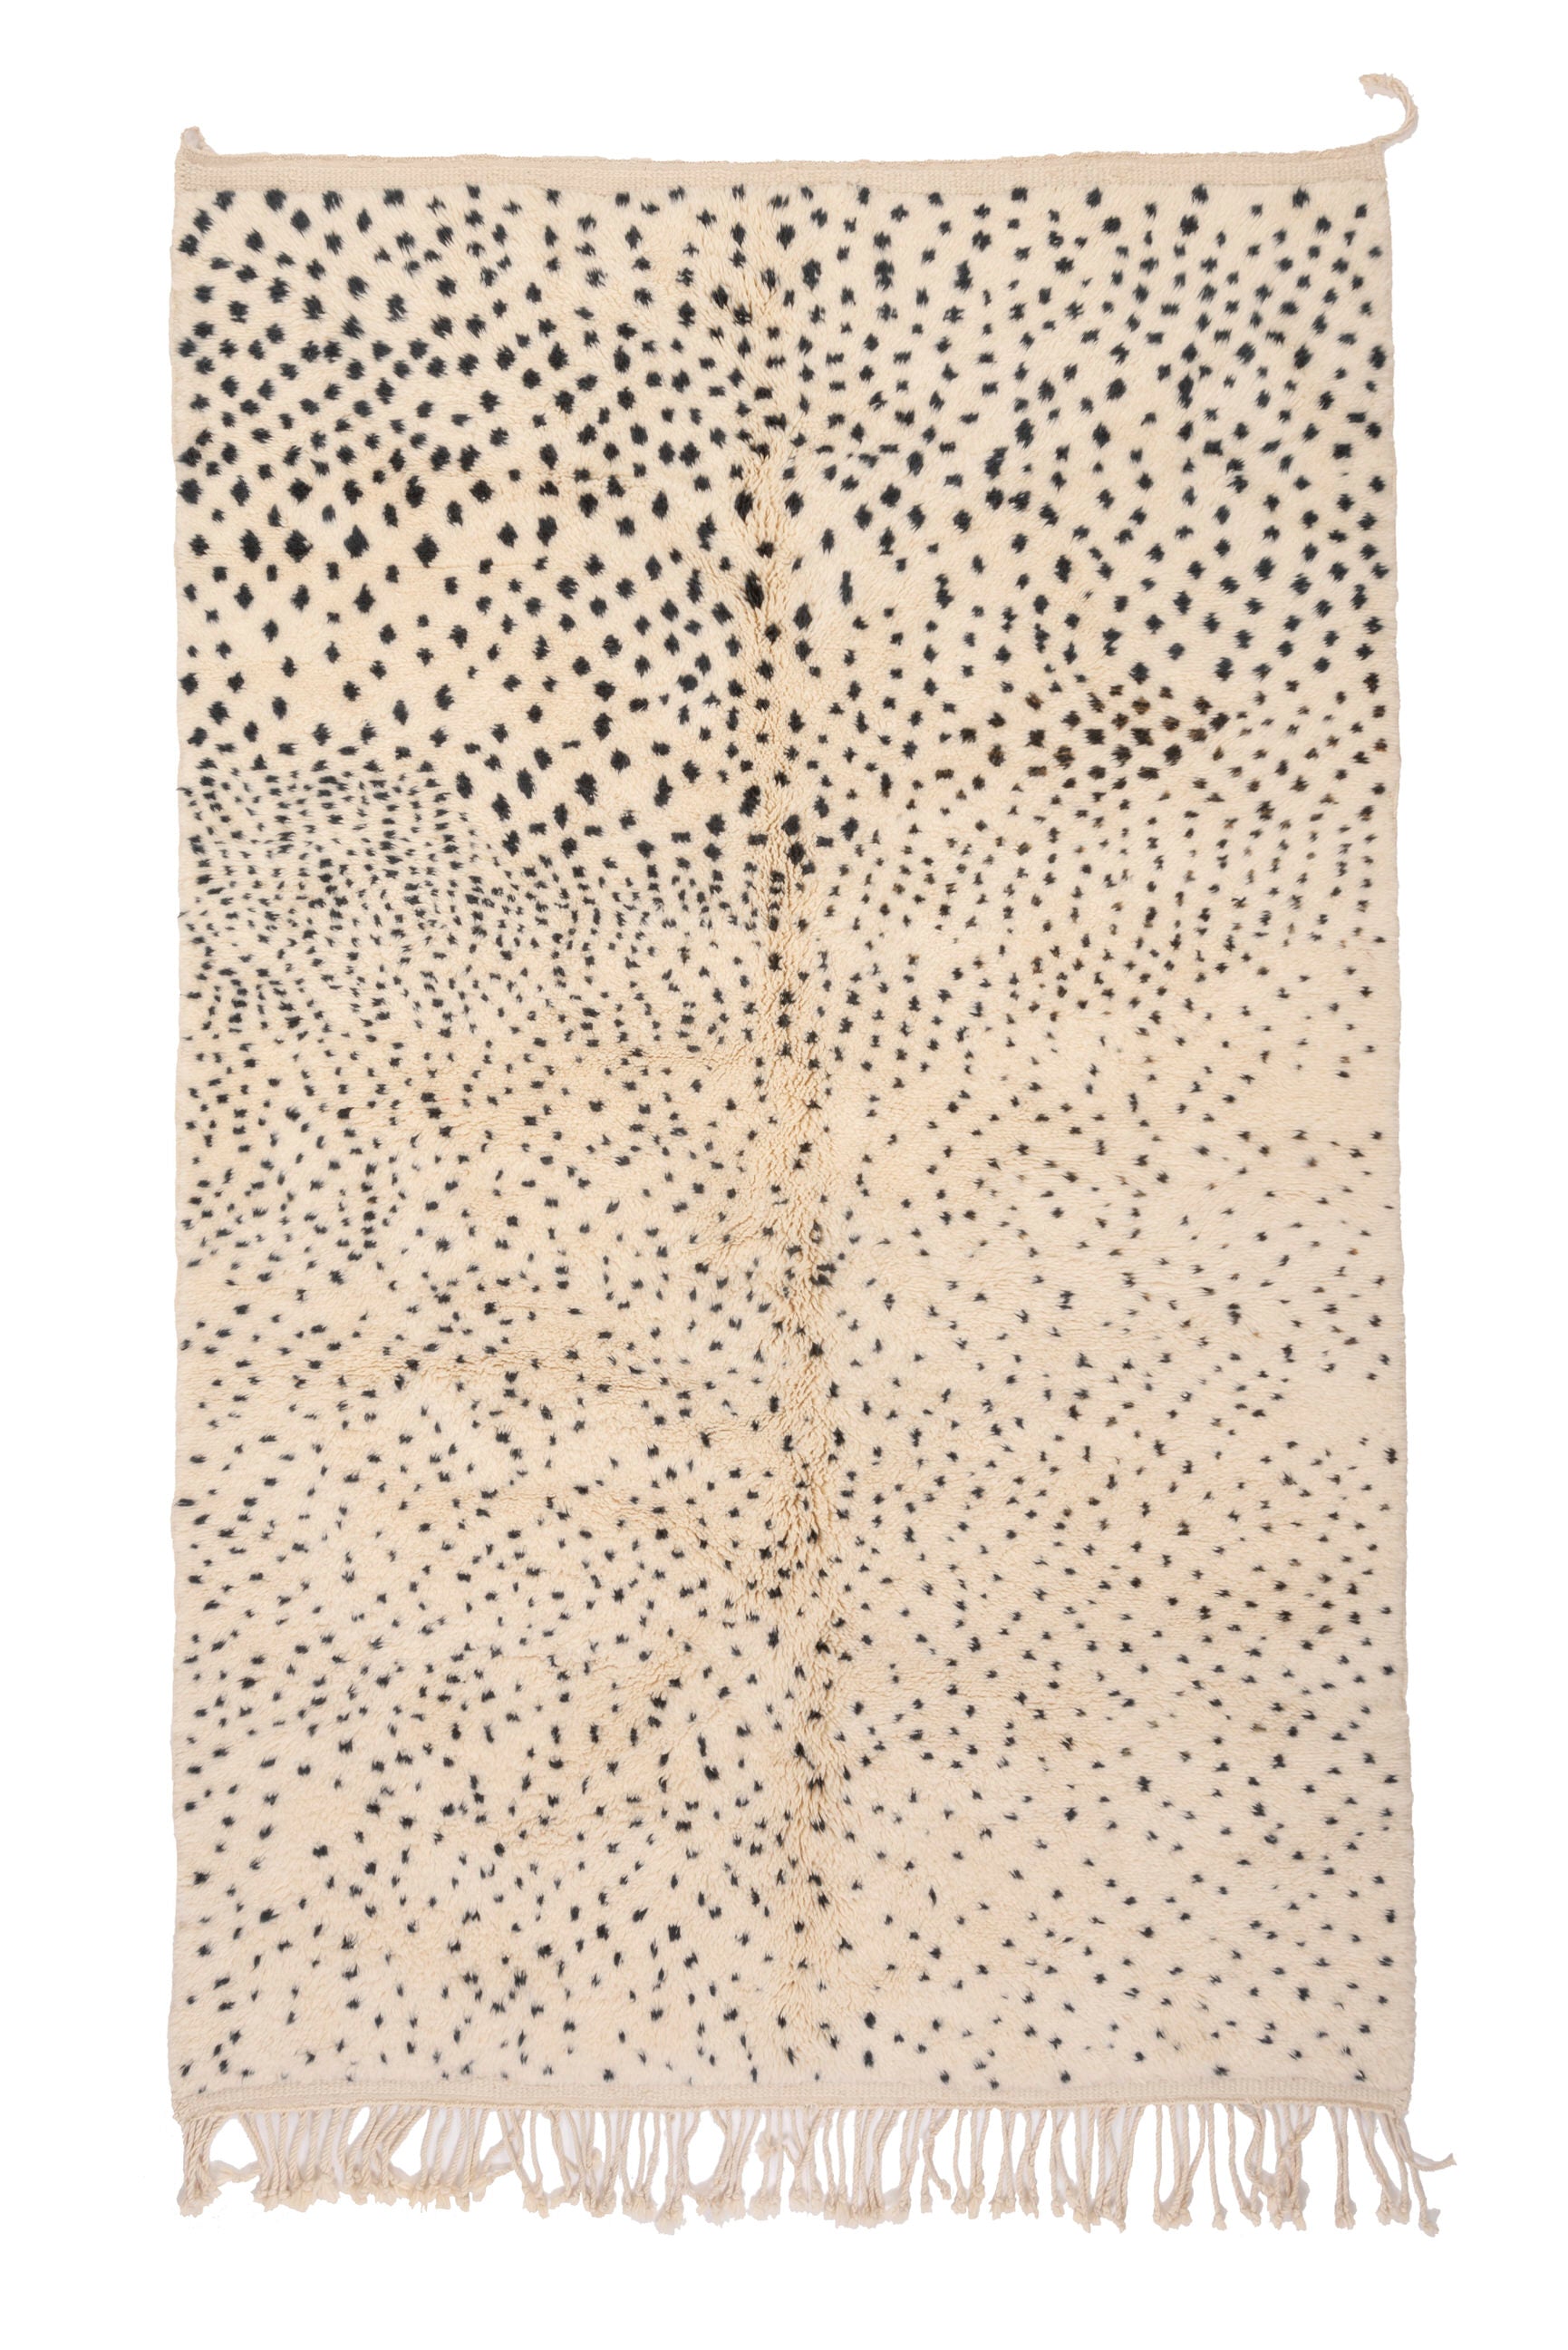 Elevate your interior with our 'Ivory Dotted Mirage Rug.' Featuring a playful pattern of degrading polka dots that transition from a dense cluster at the top to a scattered arrangement at the bottom, this rug adds a touch of whimsy and style to your space.